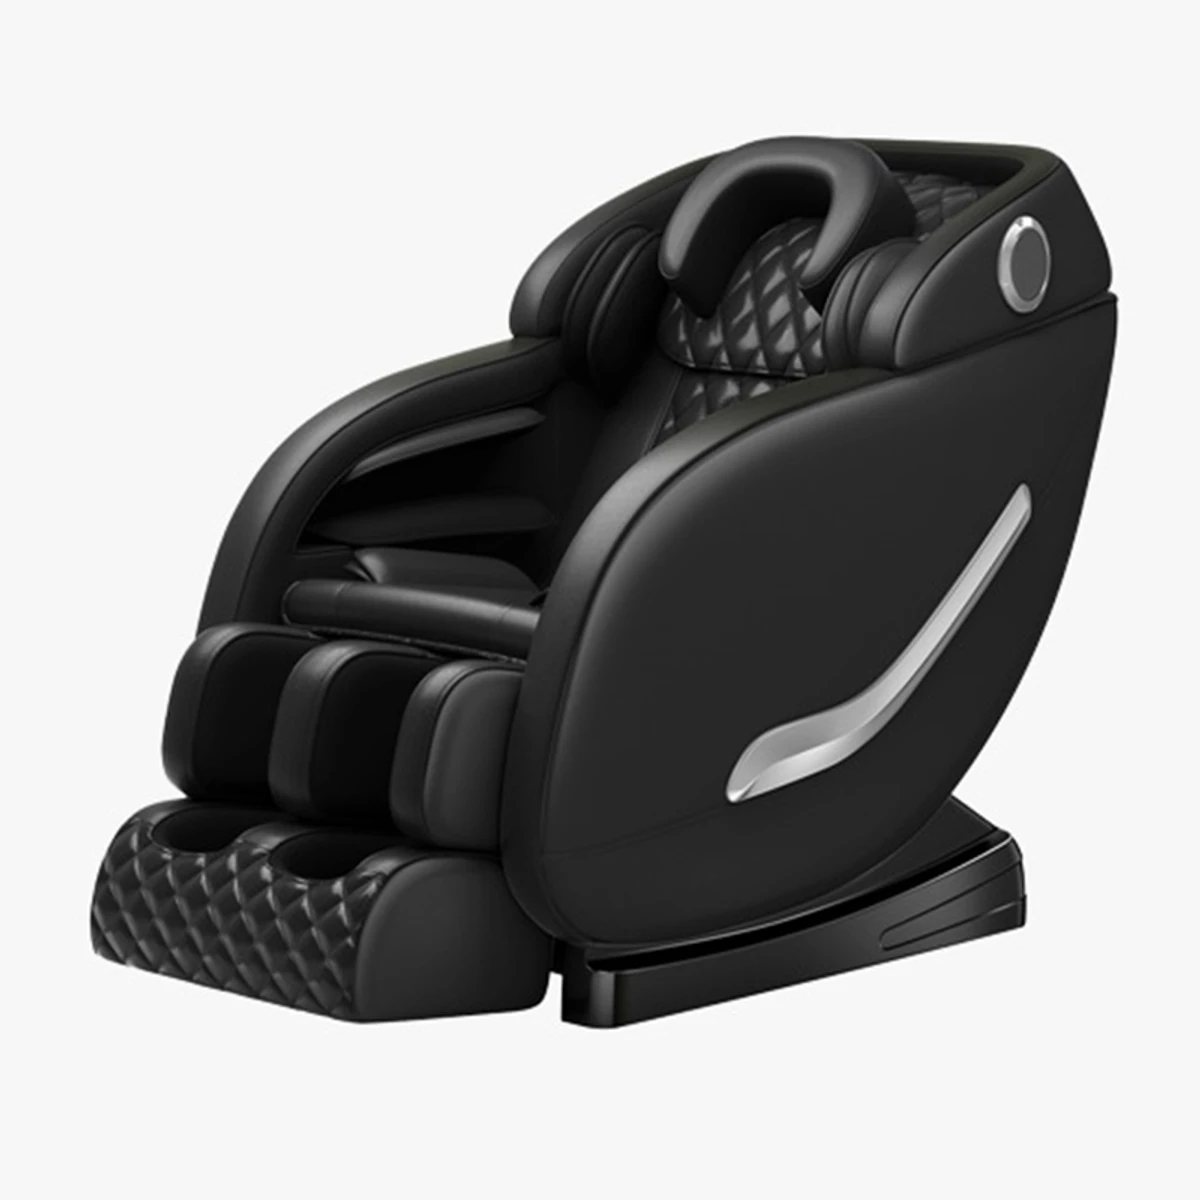 Jare 6687 Electric Relax Adjustable Reclining Massage Chair